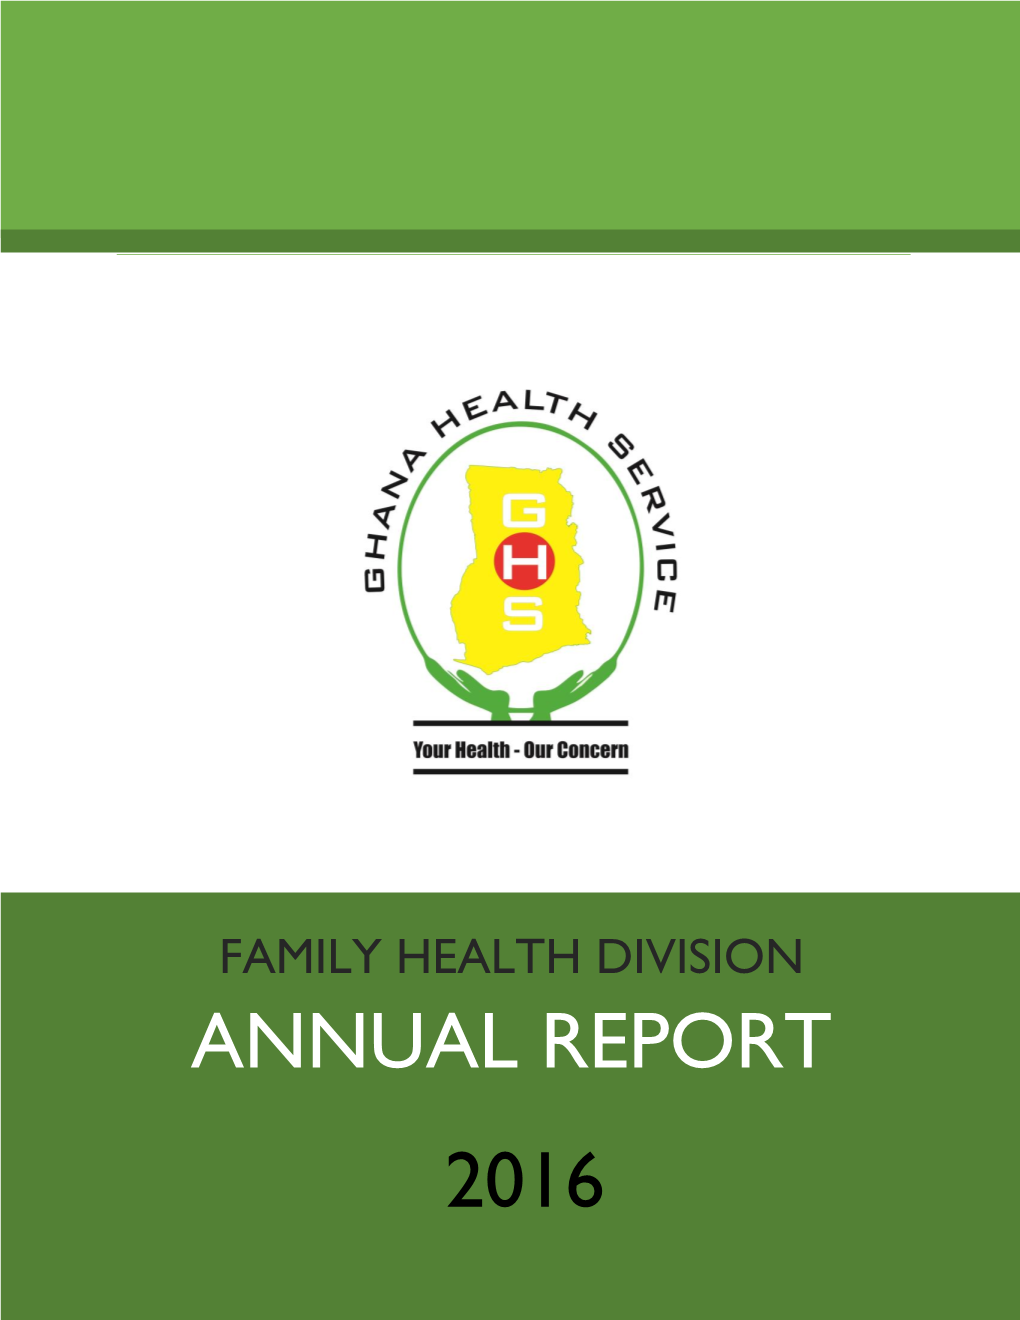 FAMILY HEALTH DIVISION ANNUAL REPORT 2016 I